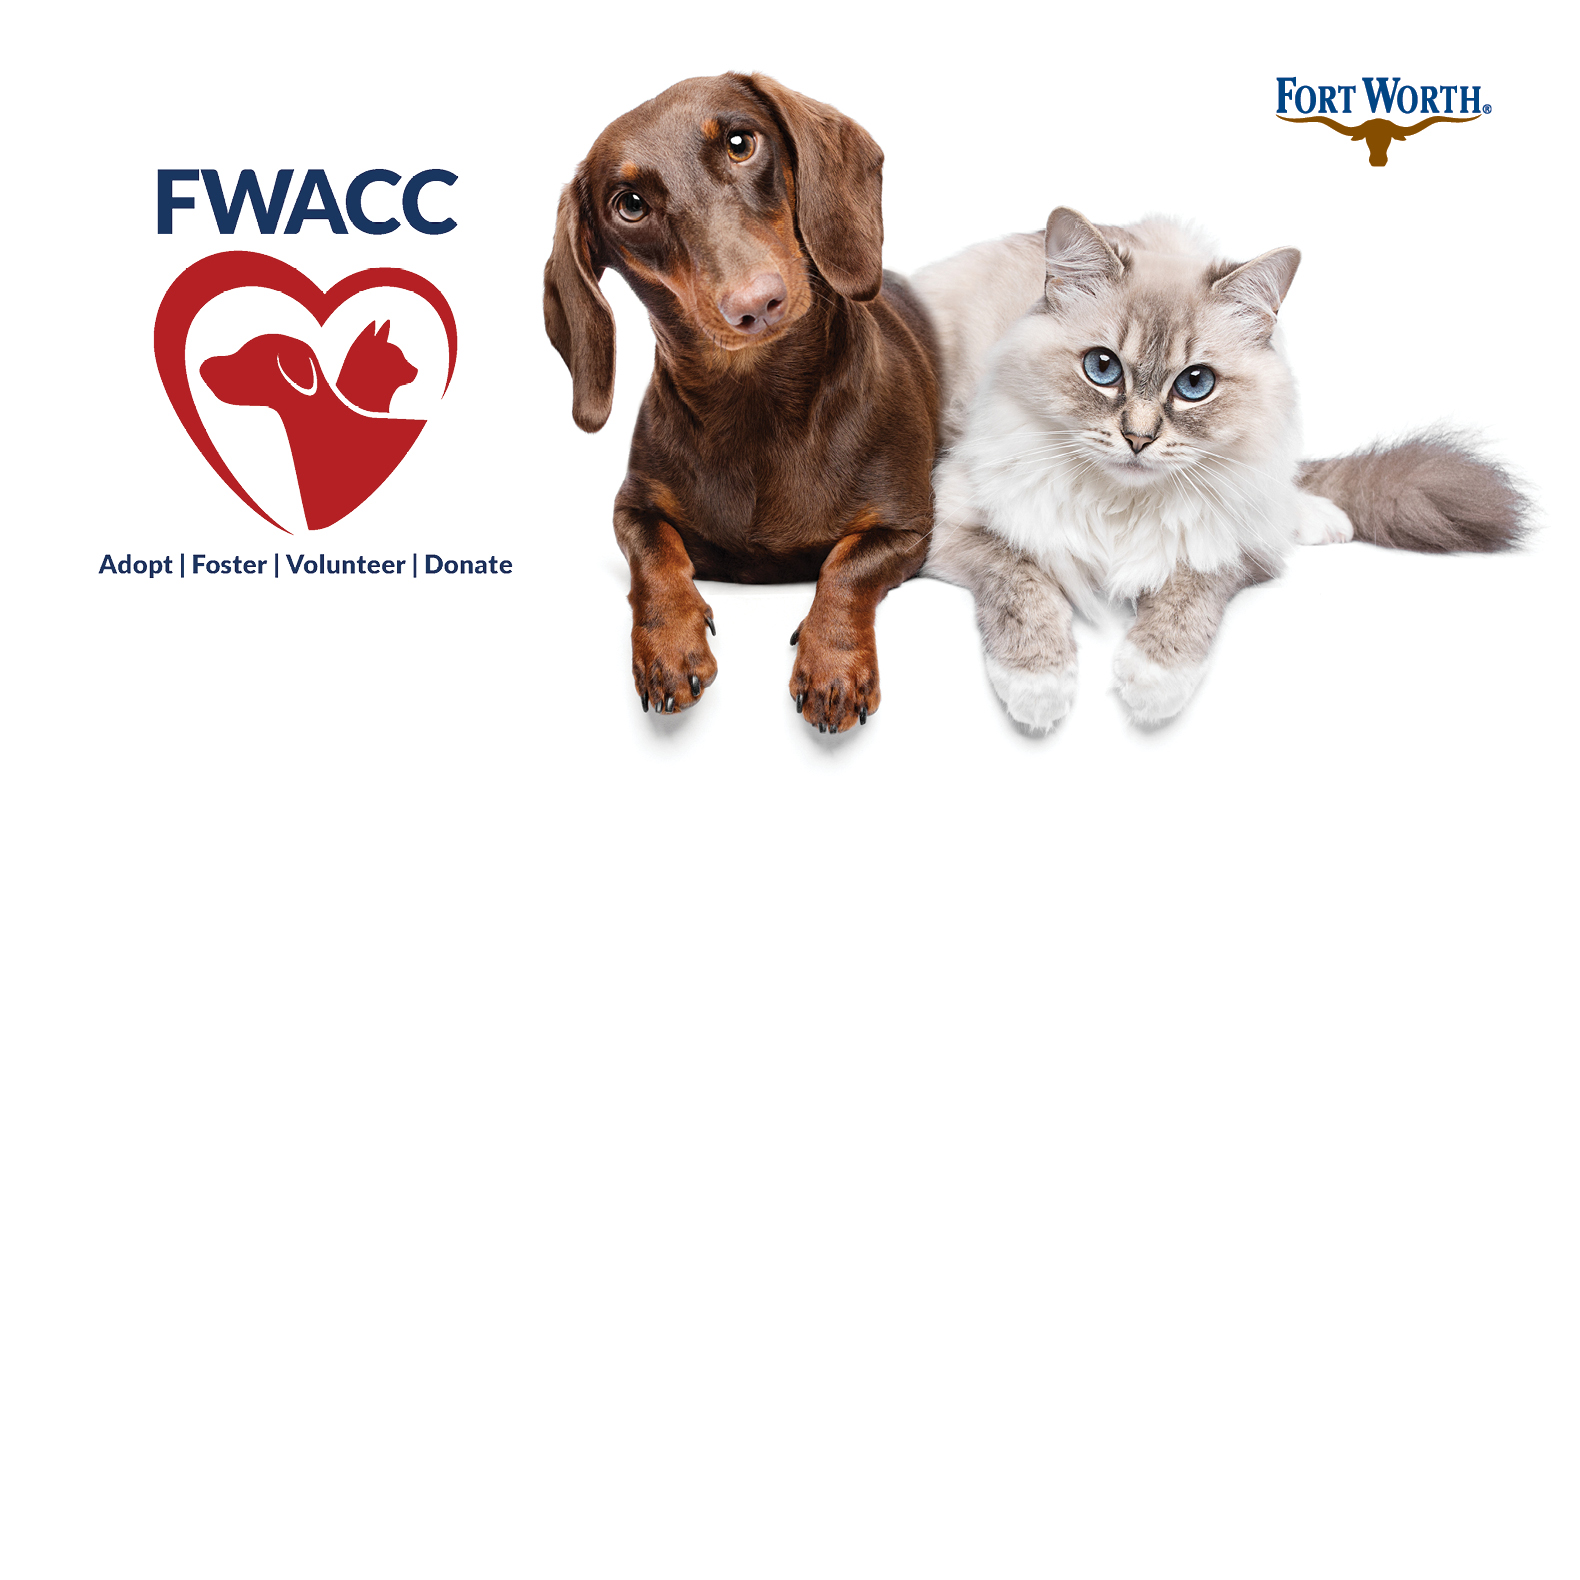 Animal Care winter safety tips - shows cat and dog withteh logo for Animal Care